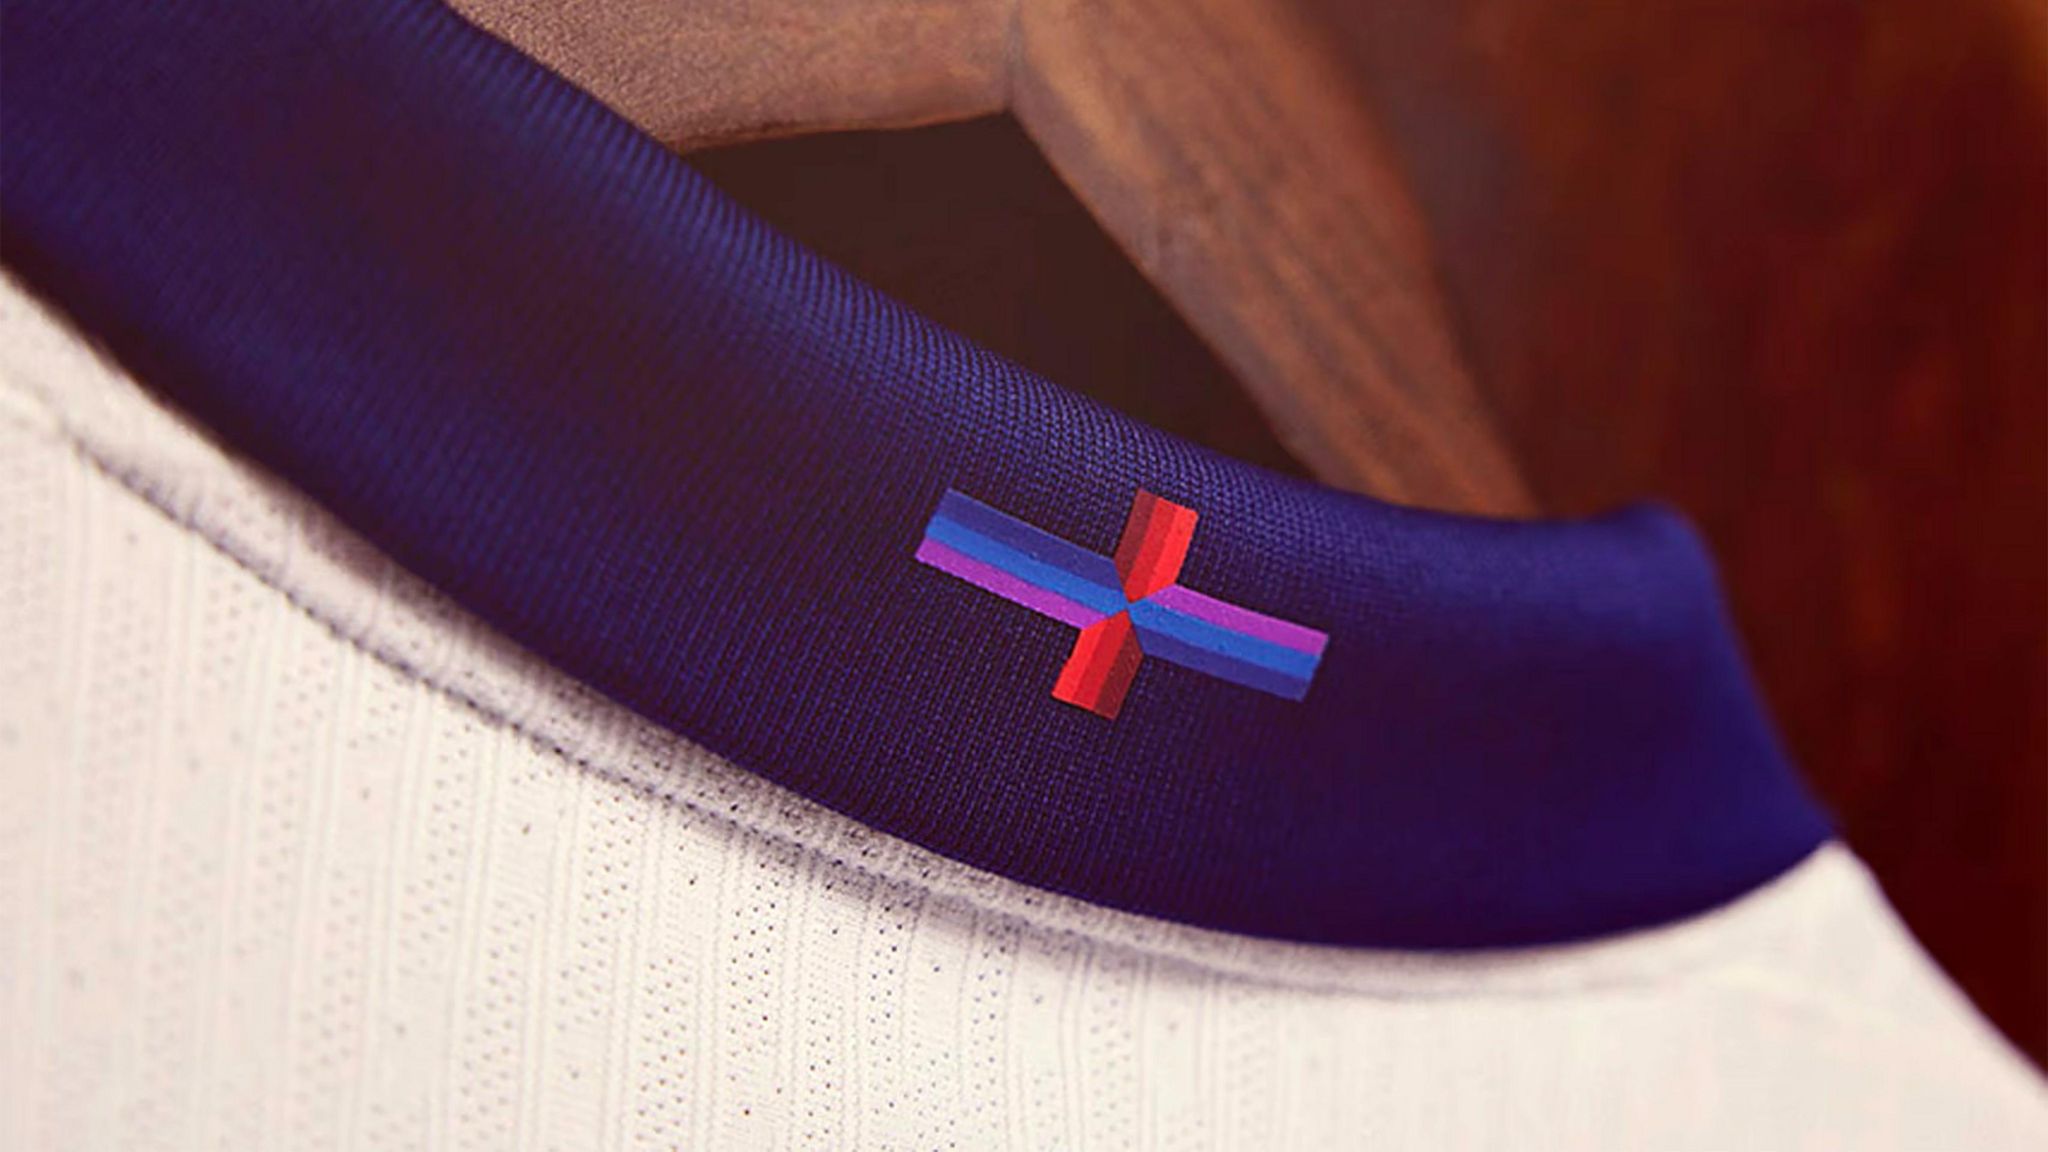 England St George's kit collar showing St George's Cross in navy, light blue and purple